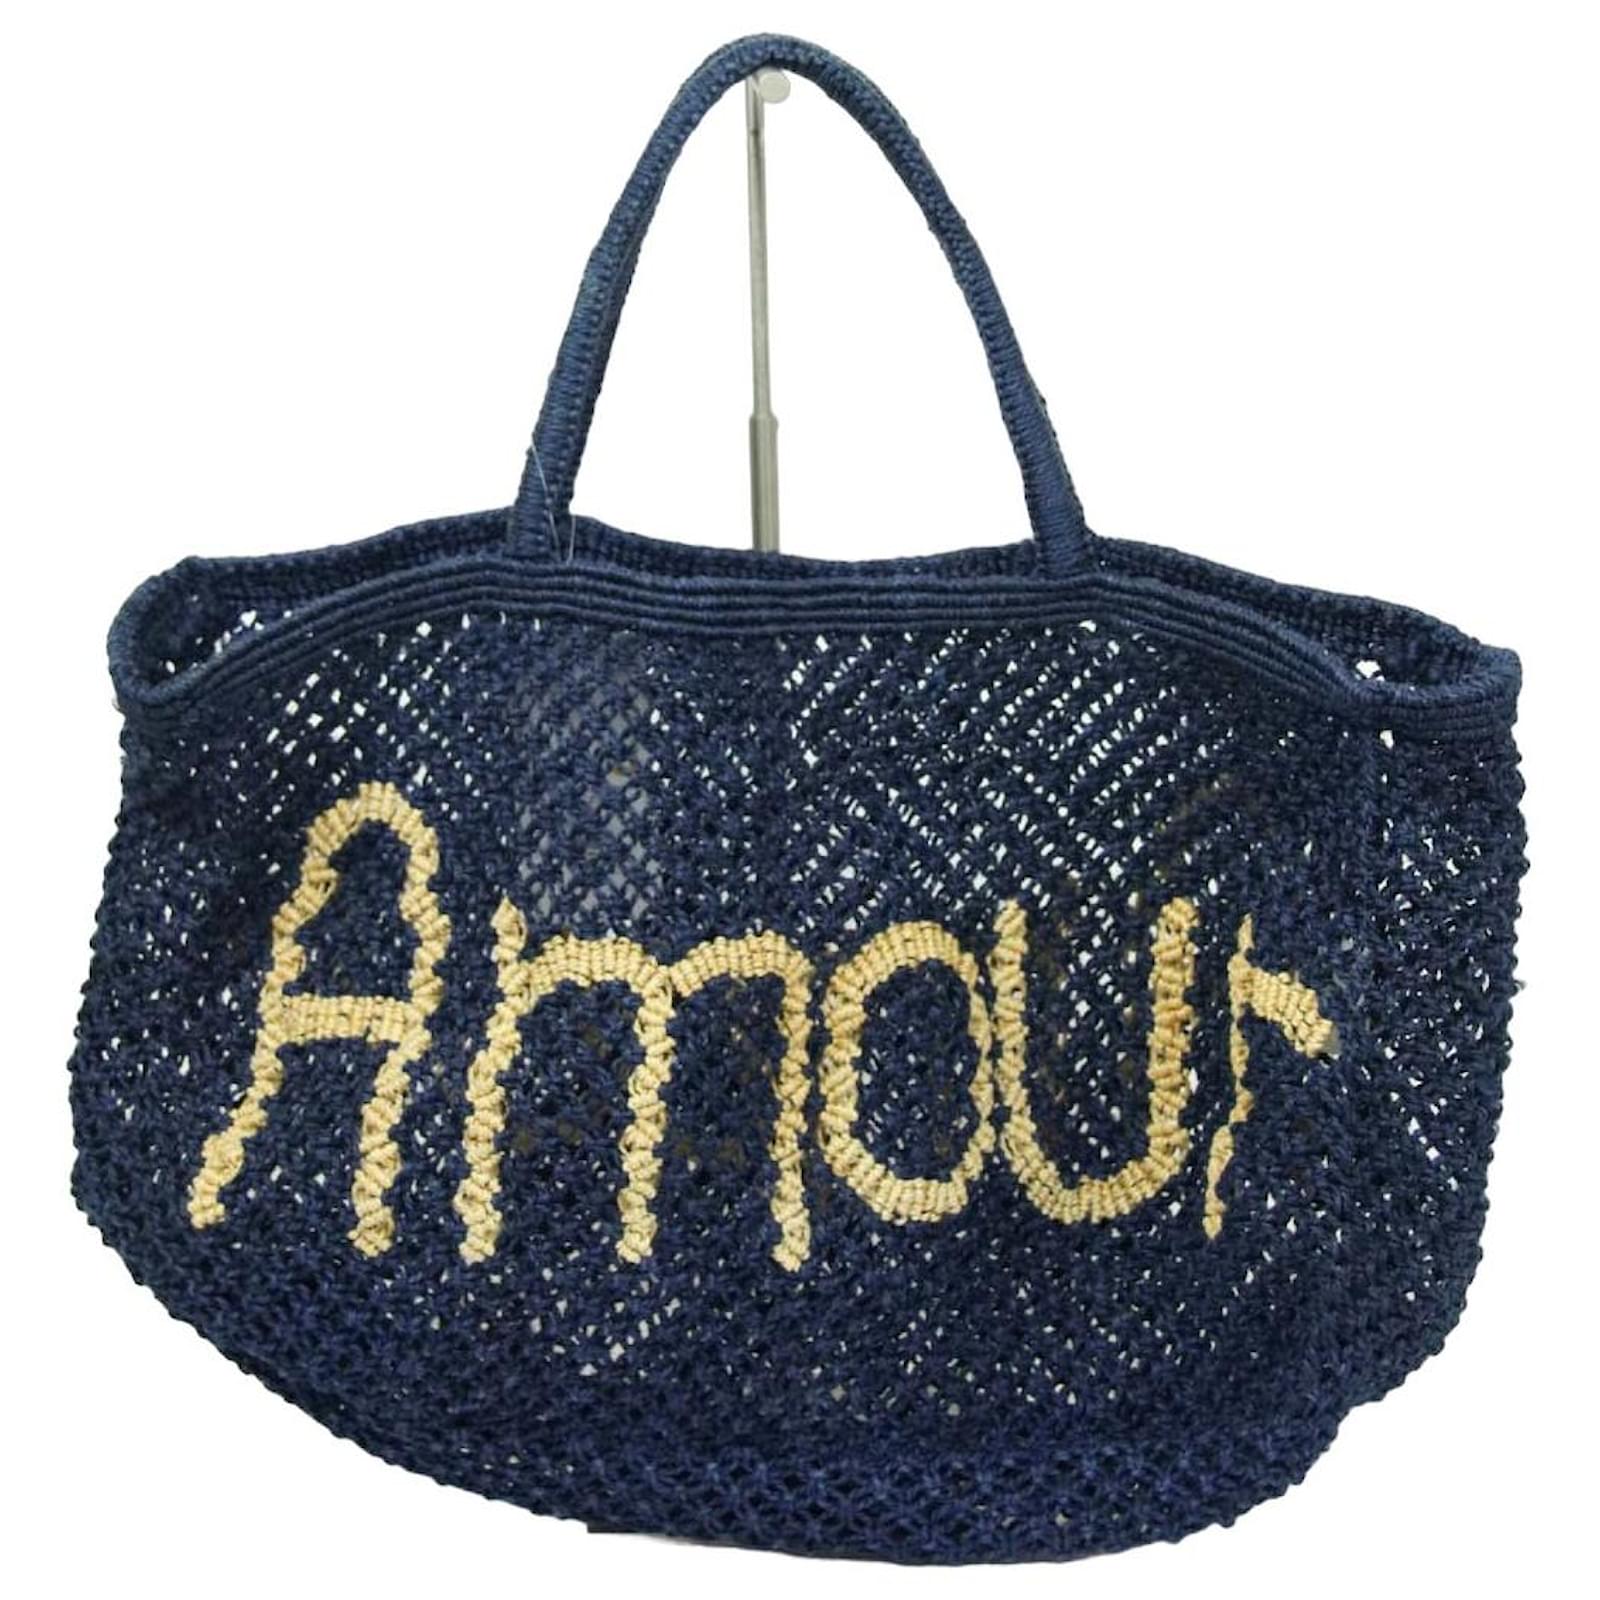 Amour Bag, from The Jacksons